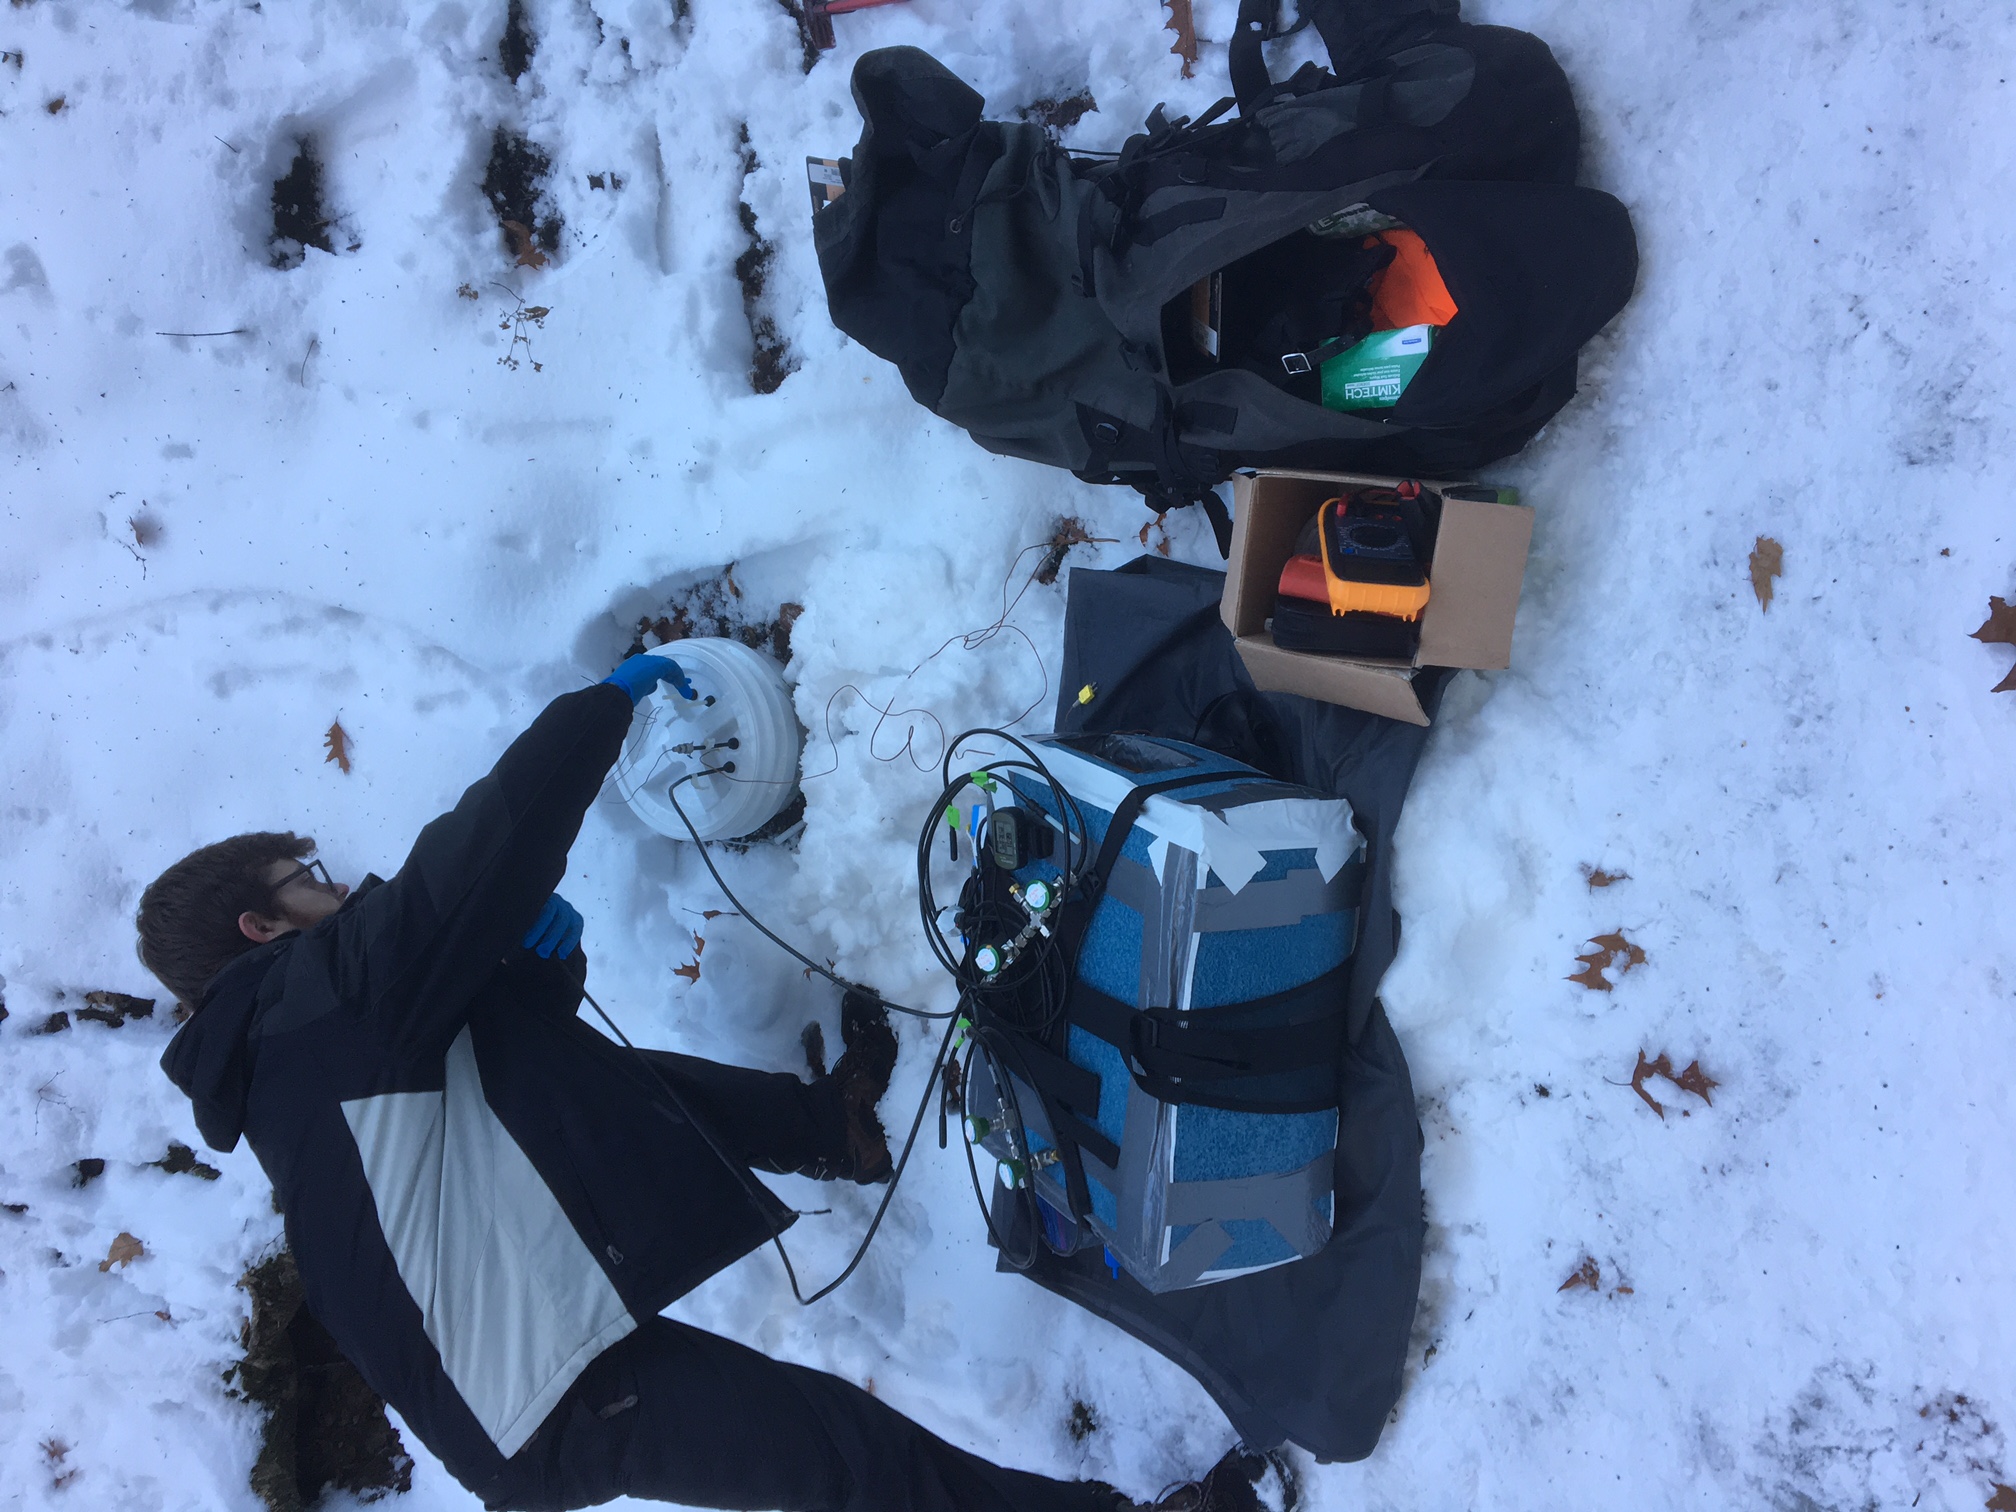 Will working on measuring geologic methane fluxes in Western NY